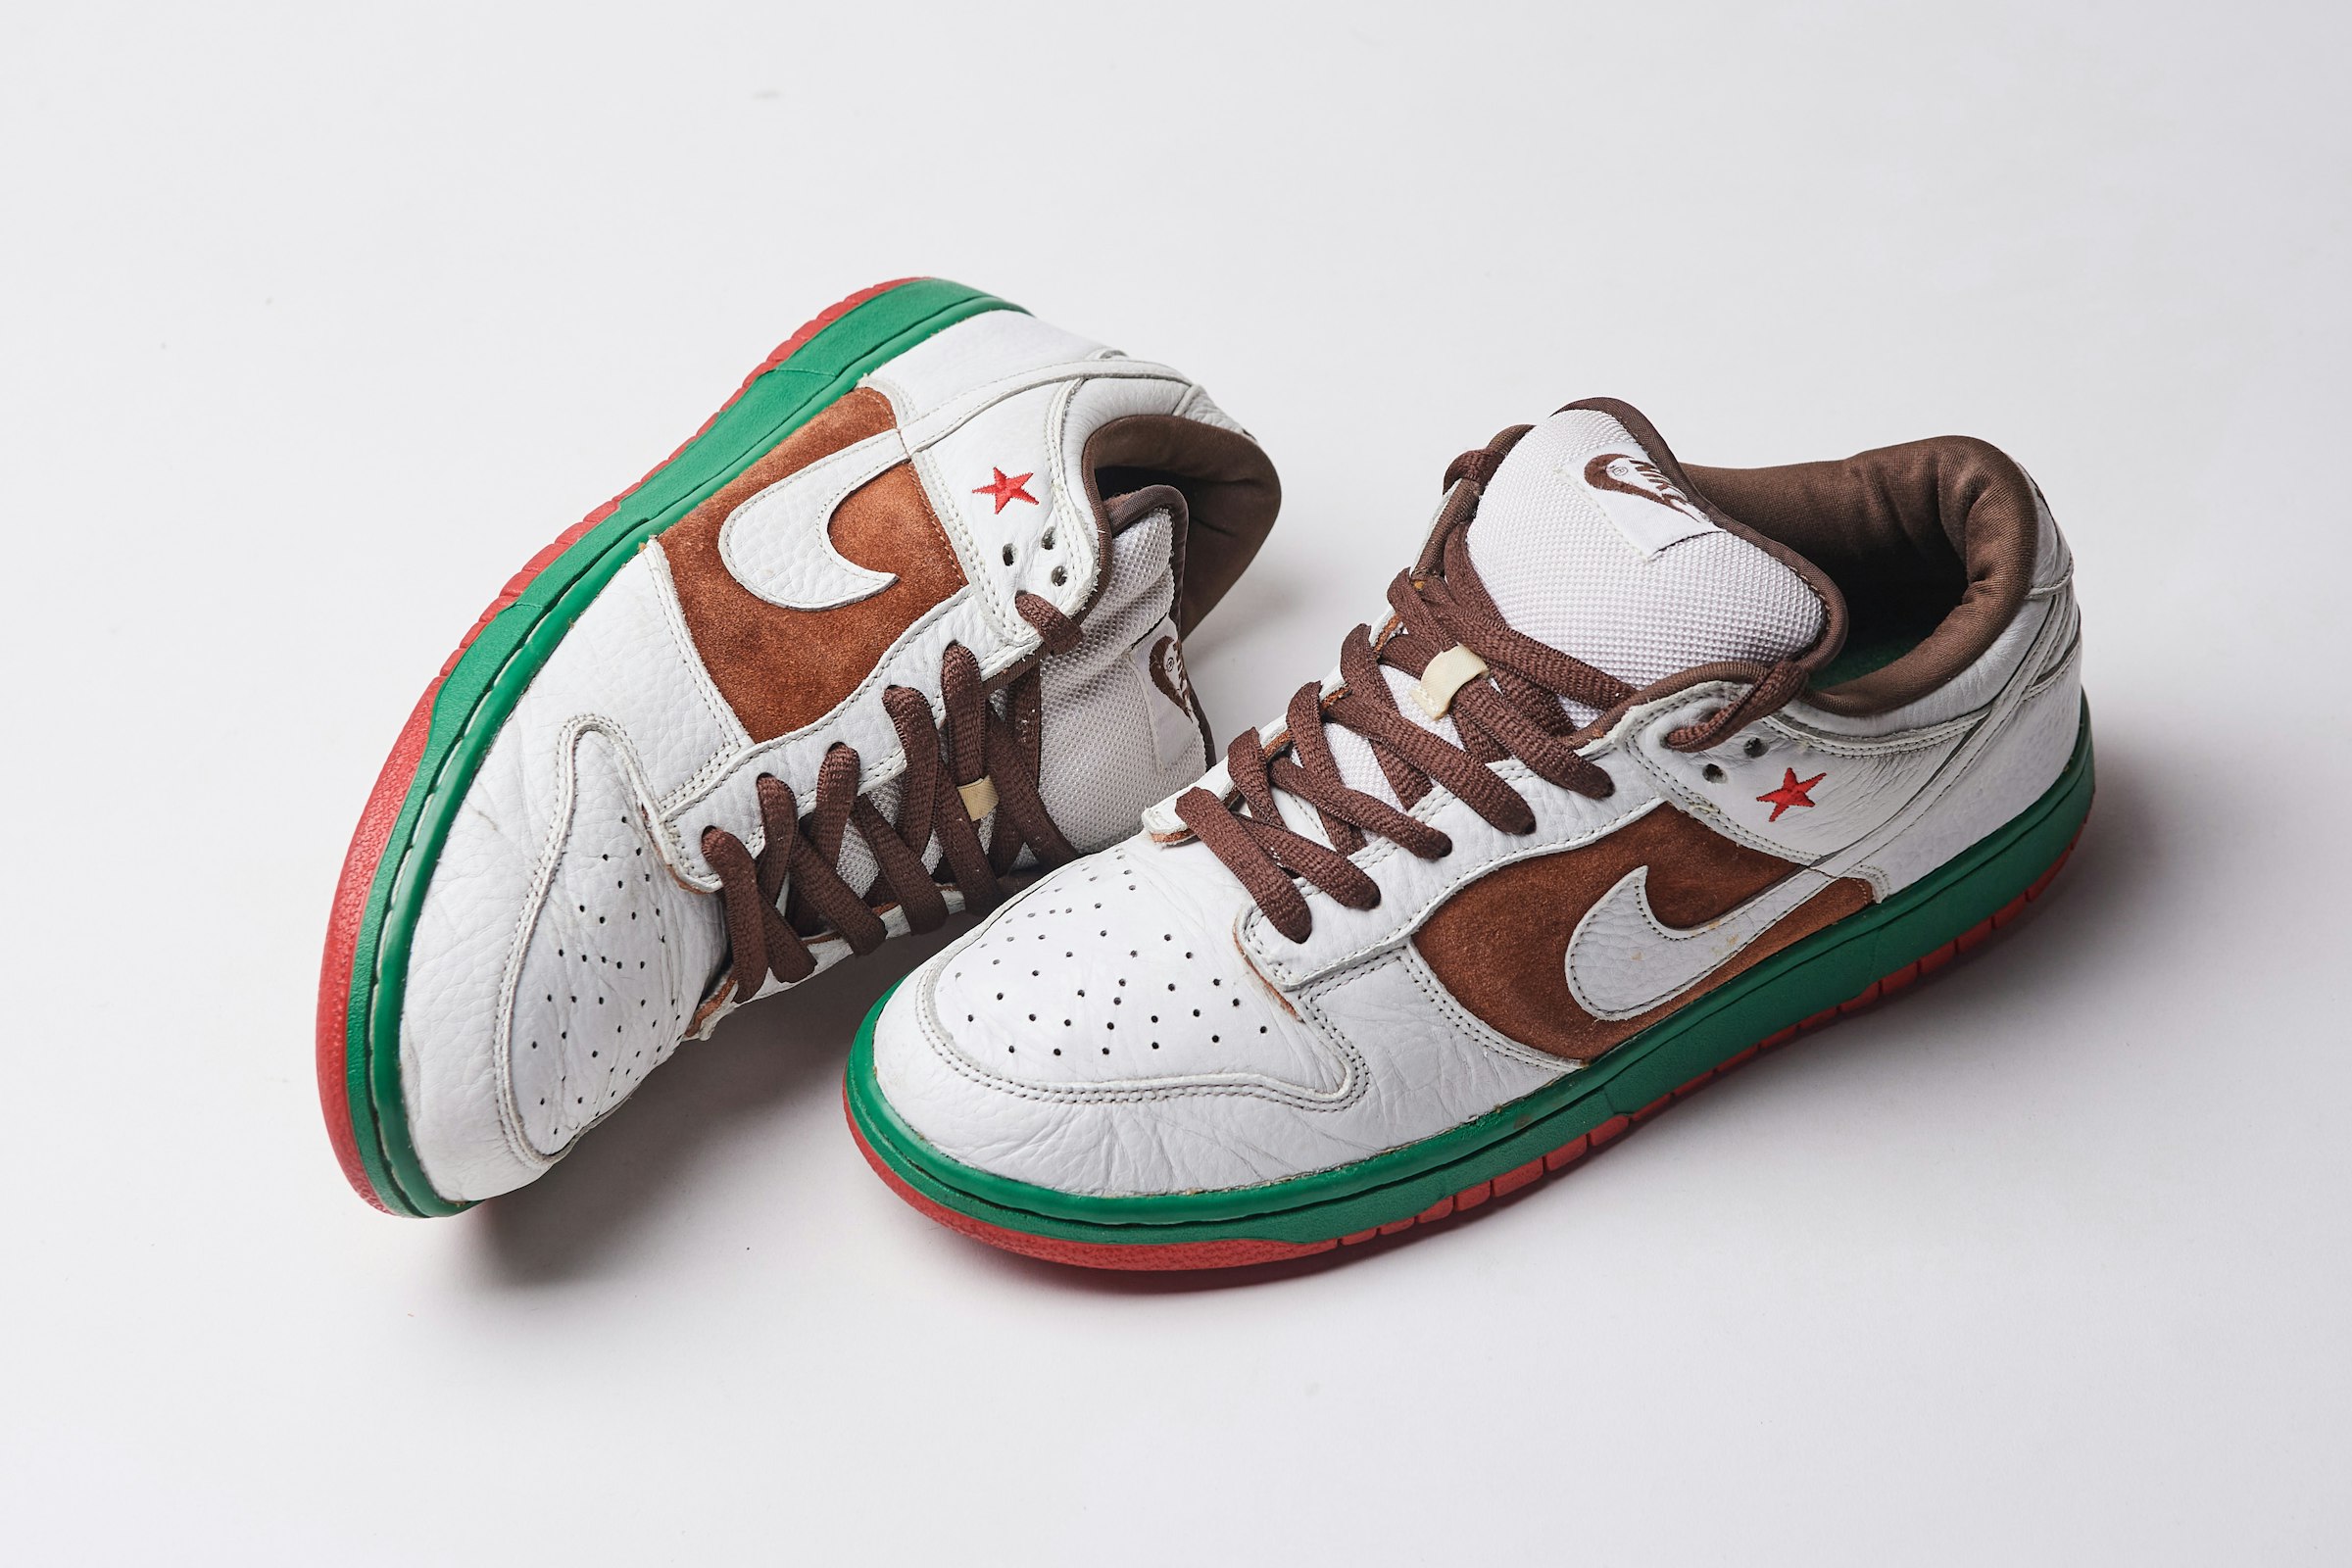 The DUNK SB 'CALIFORNIA' model officially adopts the colors of the California state flag adopted in 1911. The brown on the sides represents the now-extinct 'California Grizzly' depicted on the flag